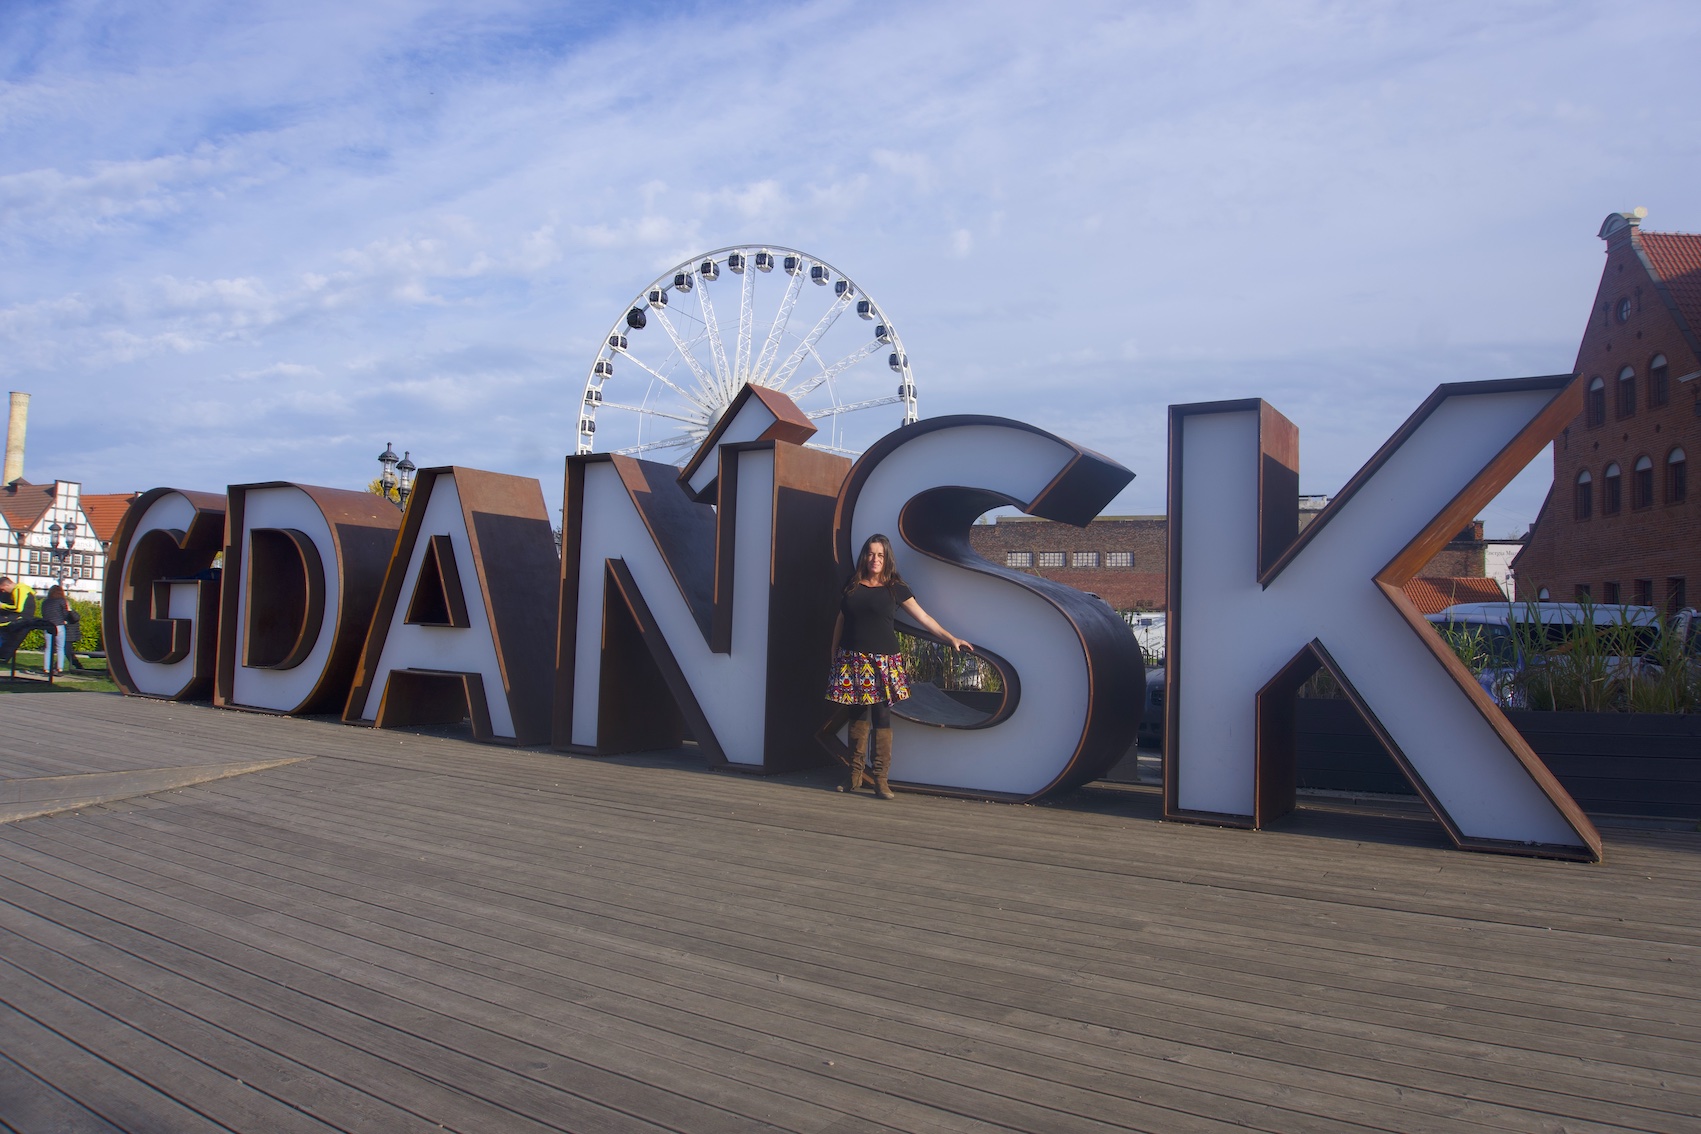 Pilar with the Gdansk letters and the fairies wheel on the back